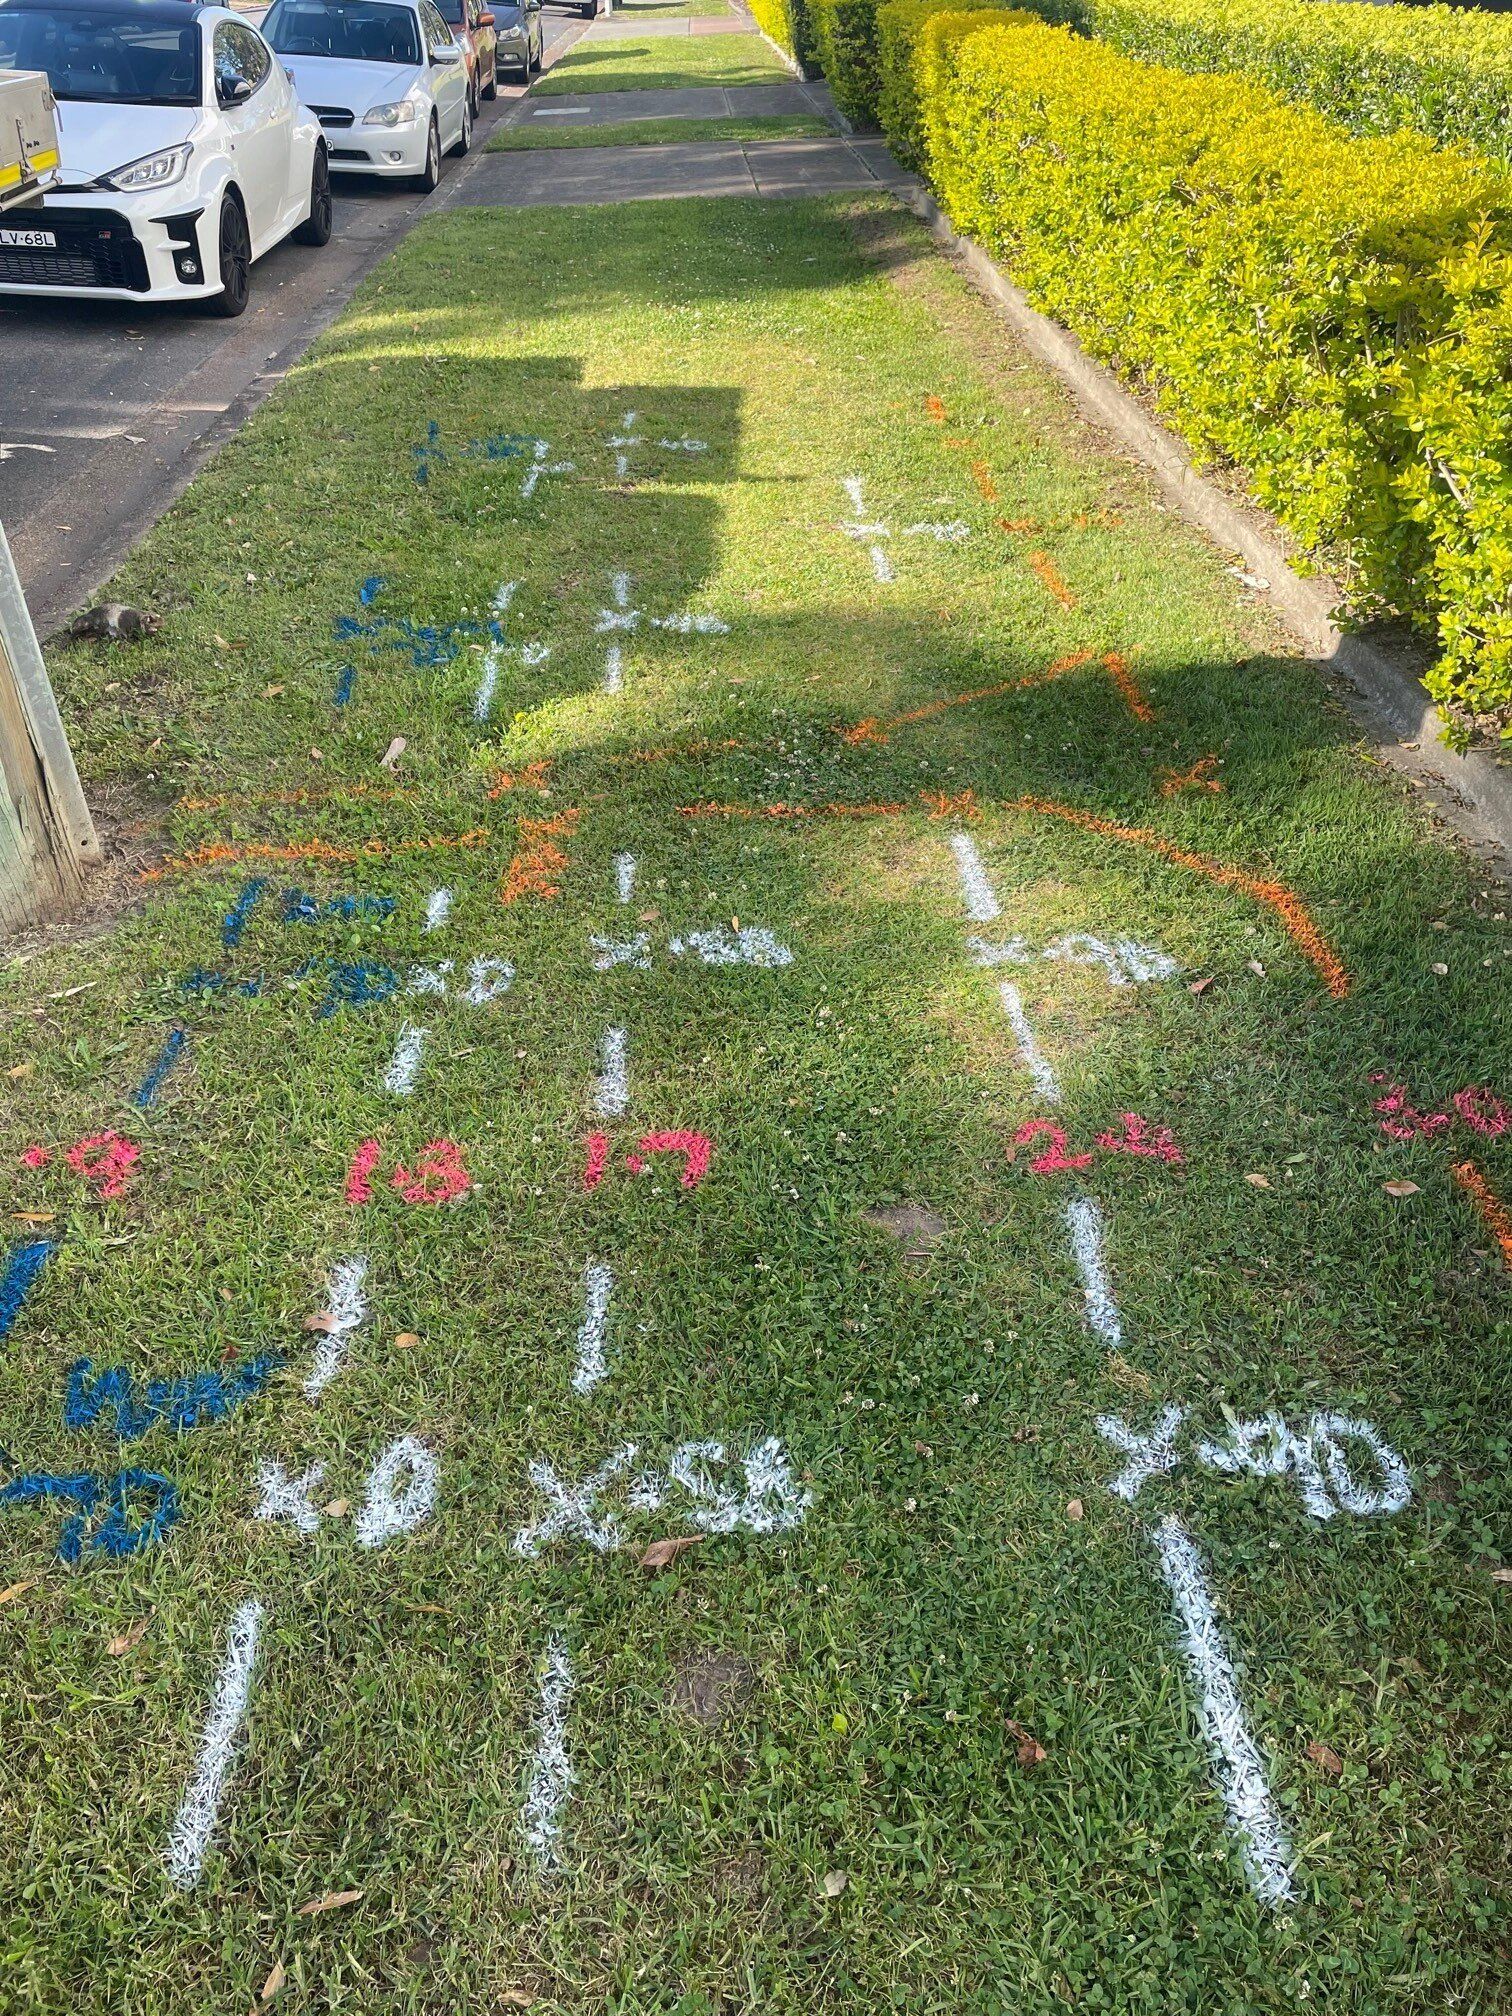 Underground Utility Markings on Lawn — East Coast Locating Services in Wallalong, NSW